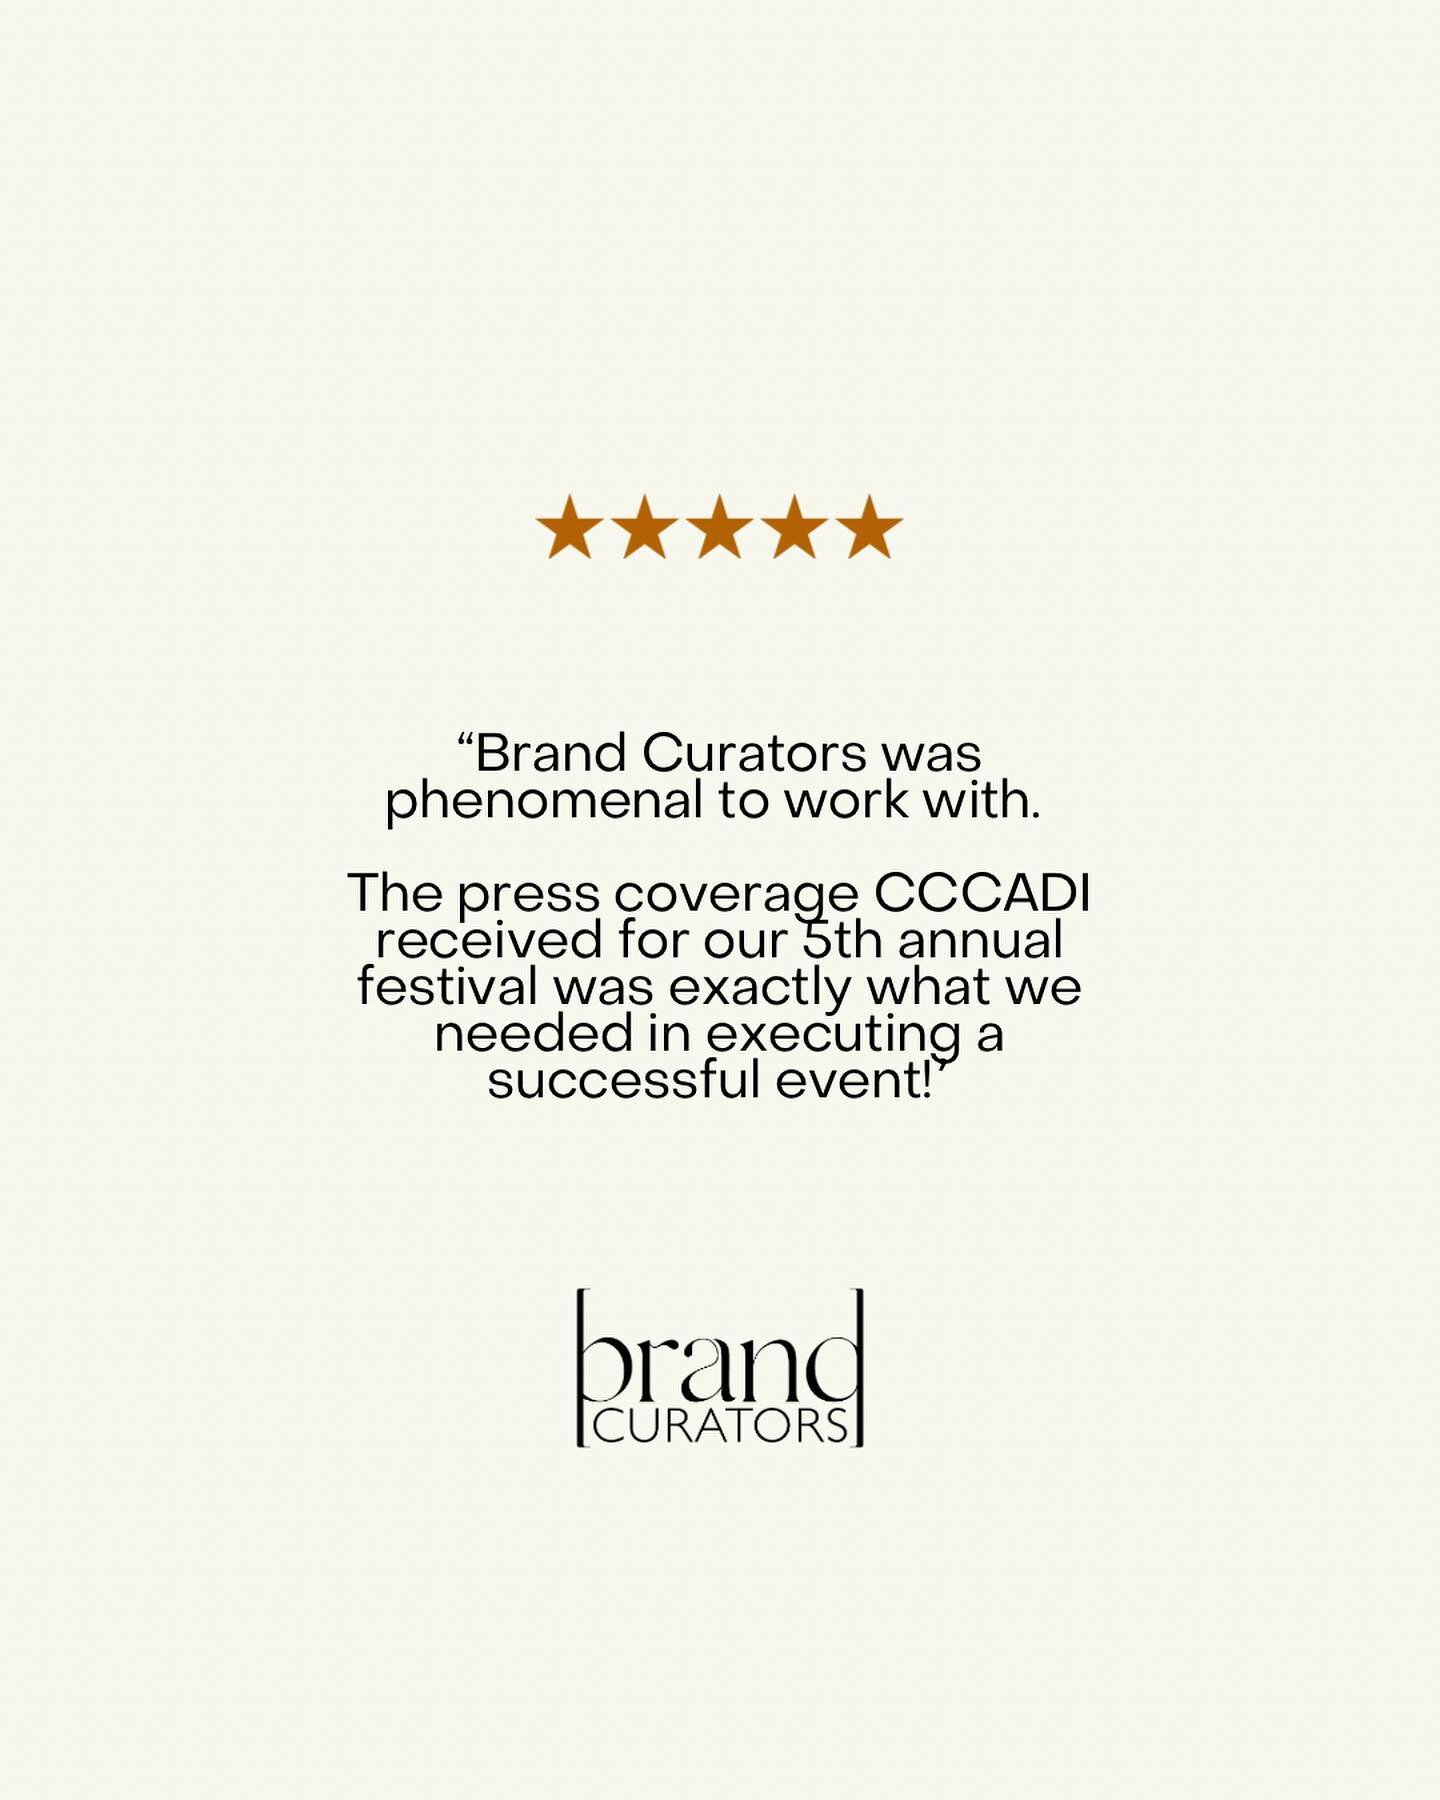 Our clients are the real MVPs, and together we&rsquo;re a winning team 🏆 

Sharing a few five-star moments that made our day ✨ Thank you for your trust and support! #ClientLove #VeryOnBrand #FiveStarAgency ⭐️⭐️⭐️⭐️⭐️